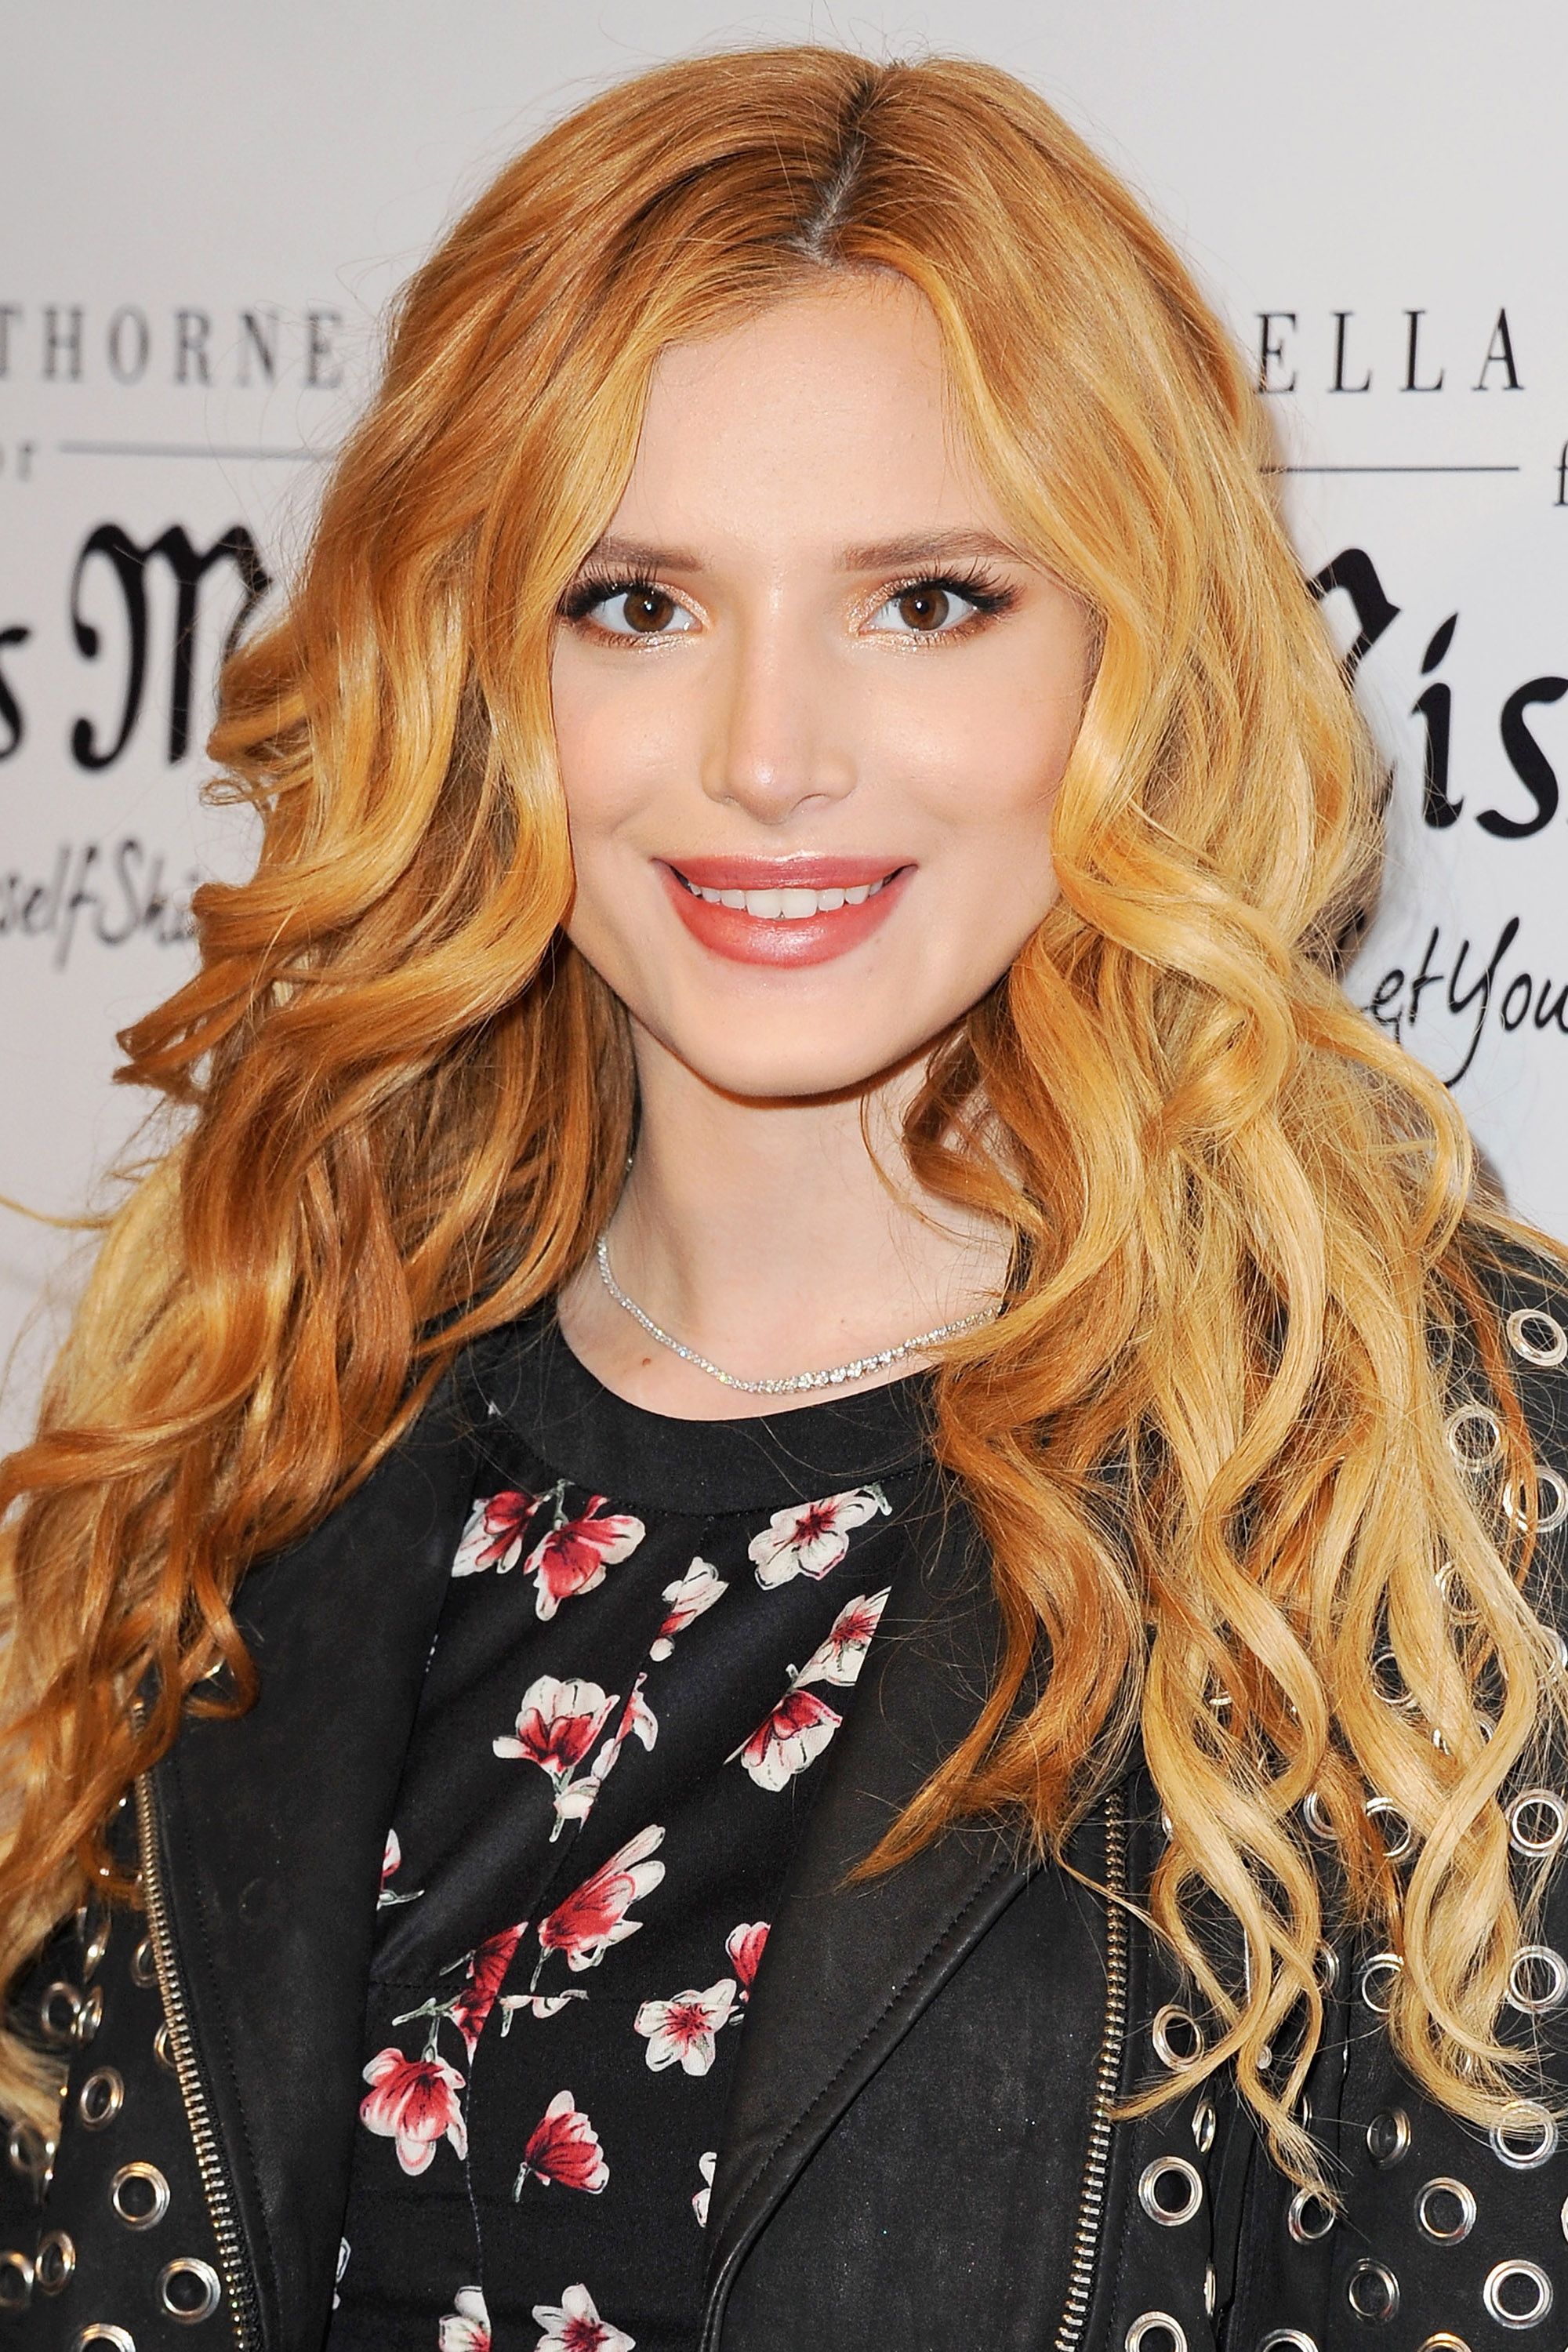 19 Best Light Strawberry Blonde Hair Color Ideas to Match Your Skin Tone